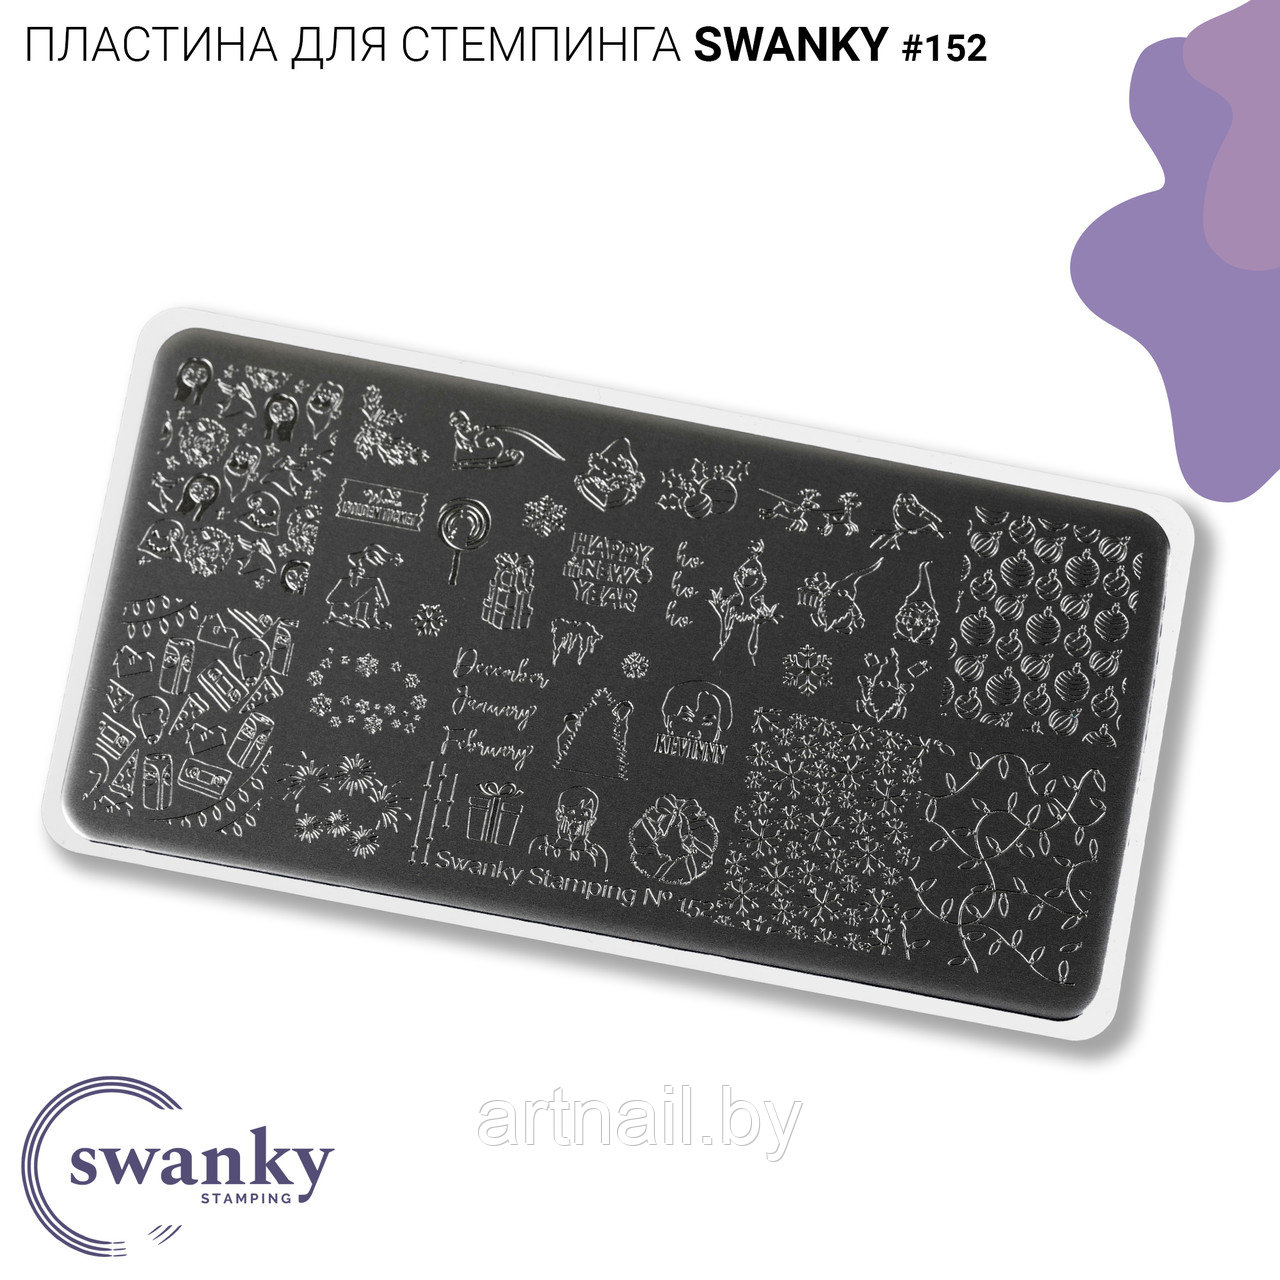 Swanky Stamping, Пластина №152